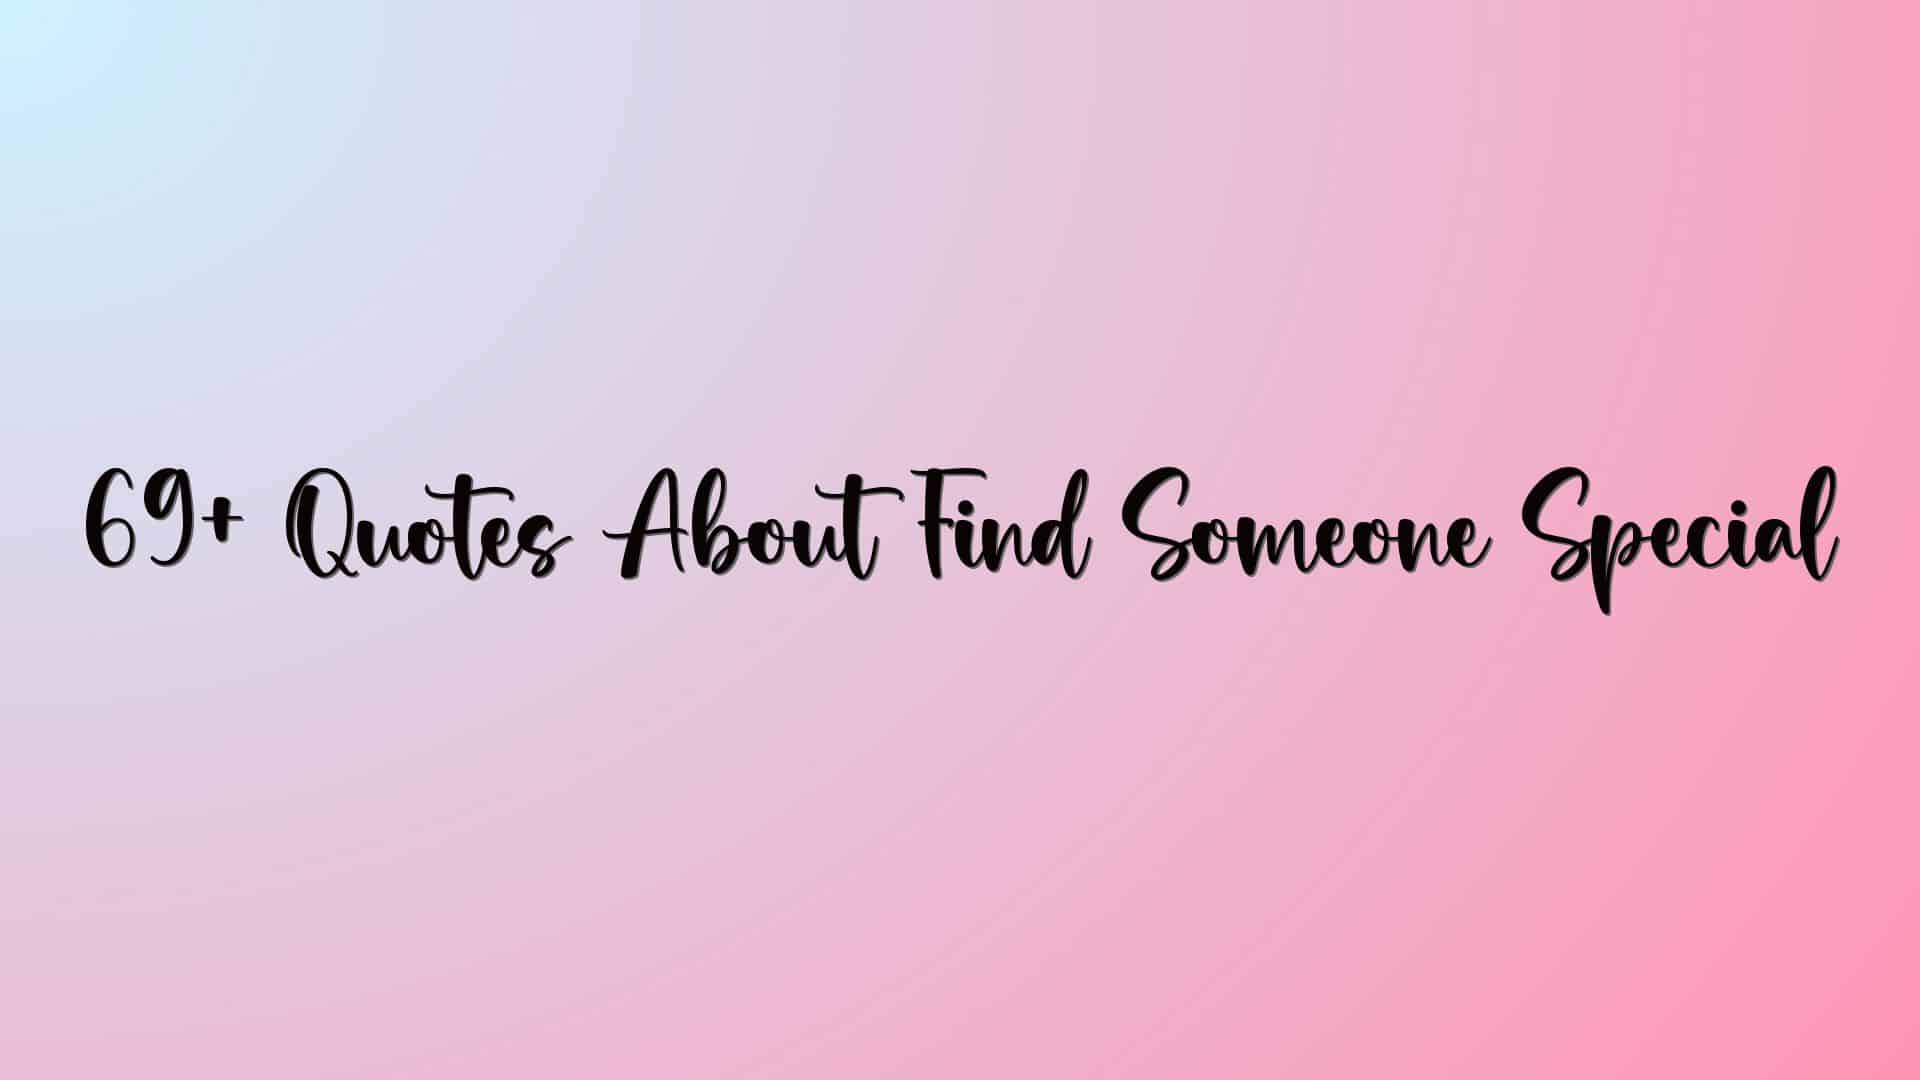 69+ Quotes About Find Someone Special